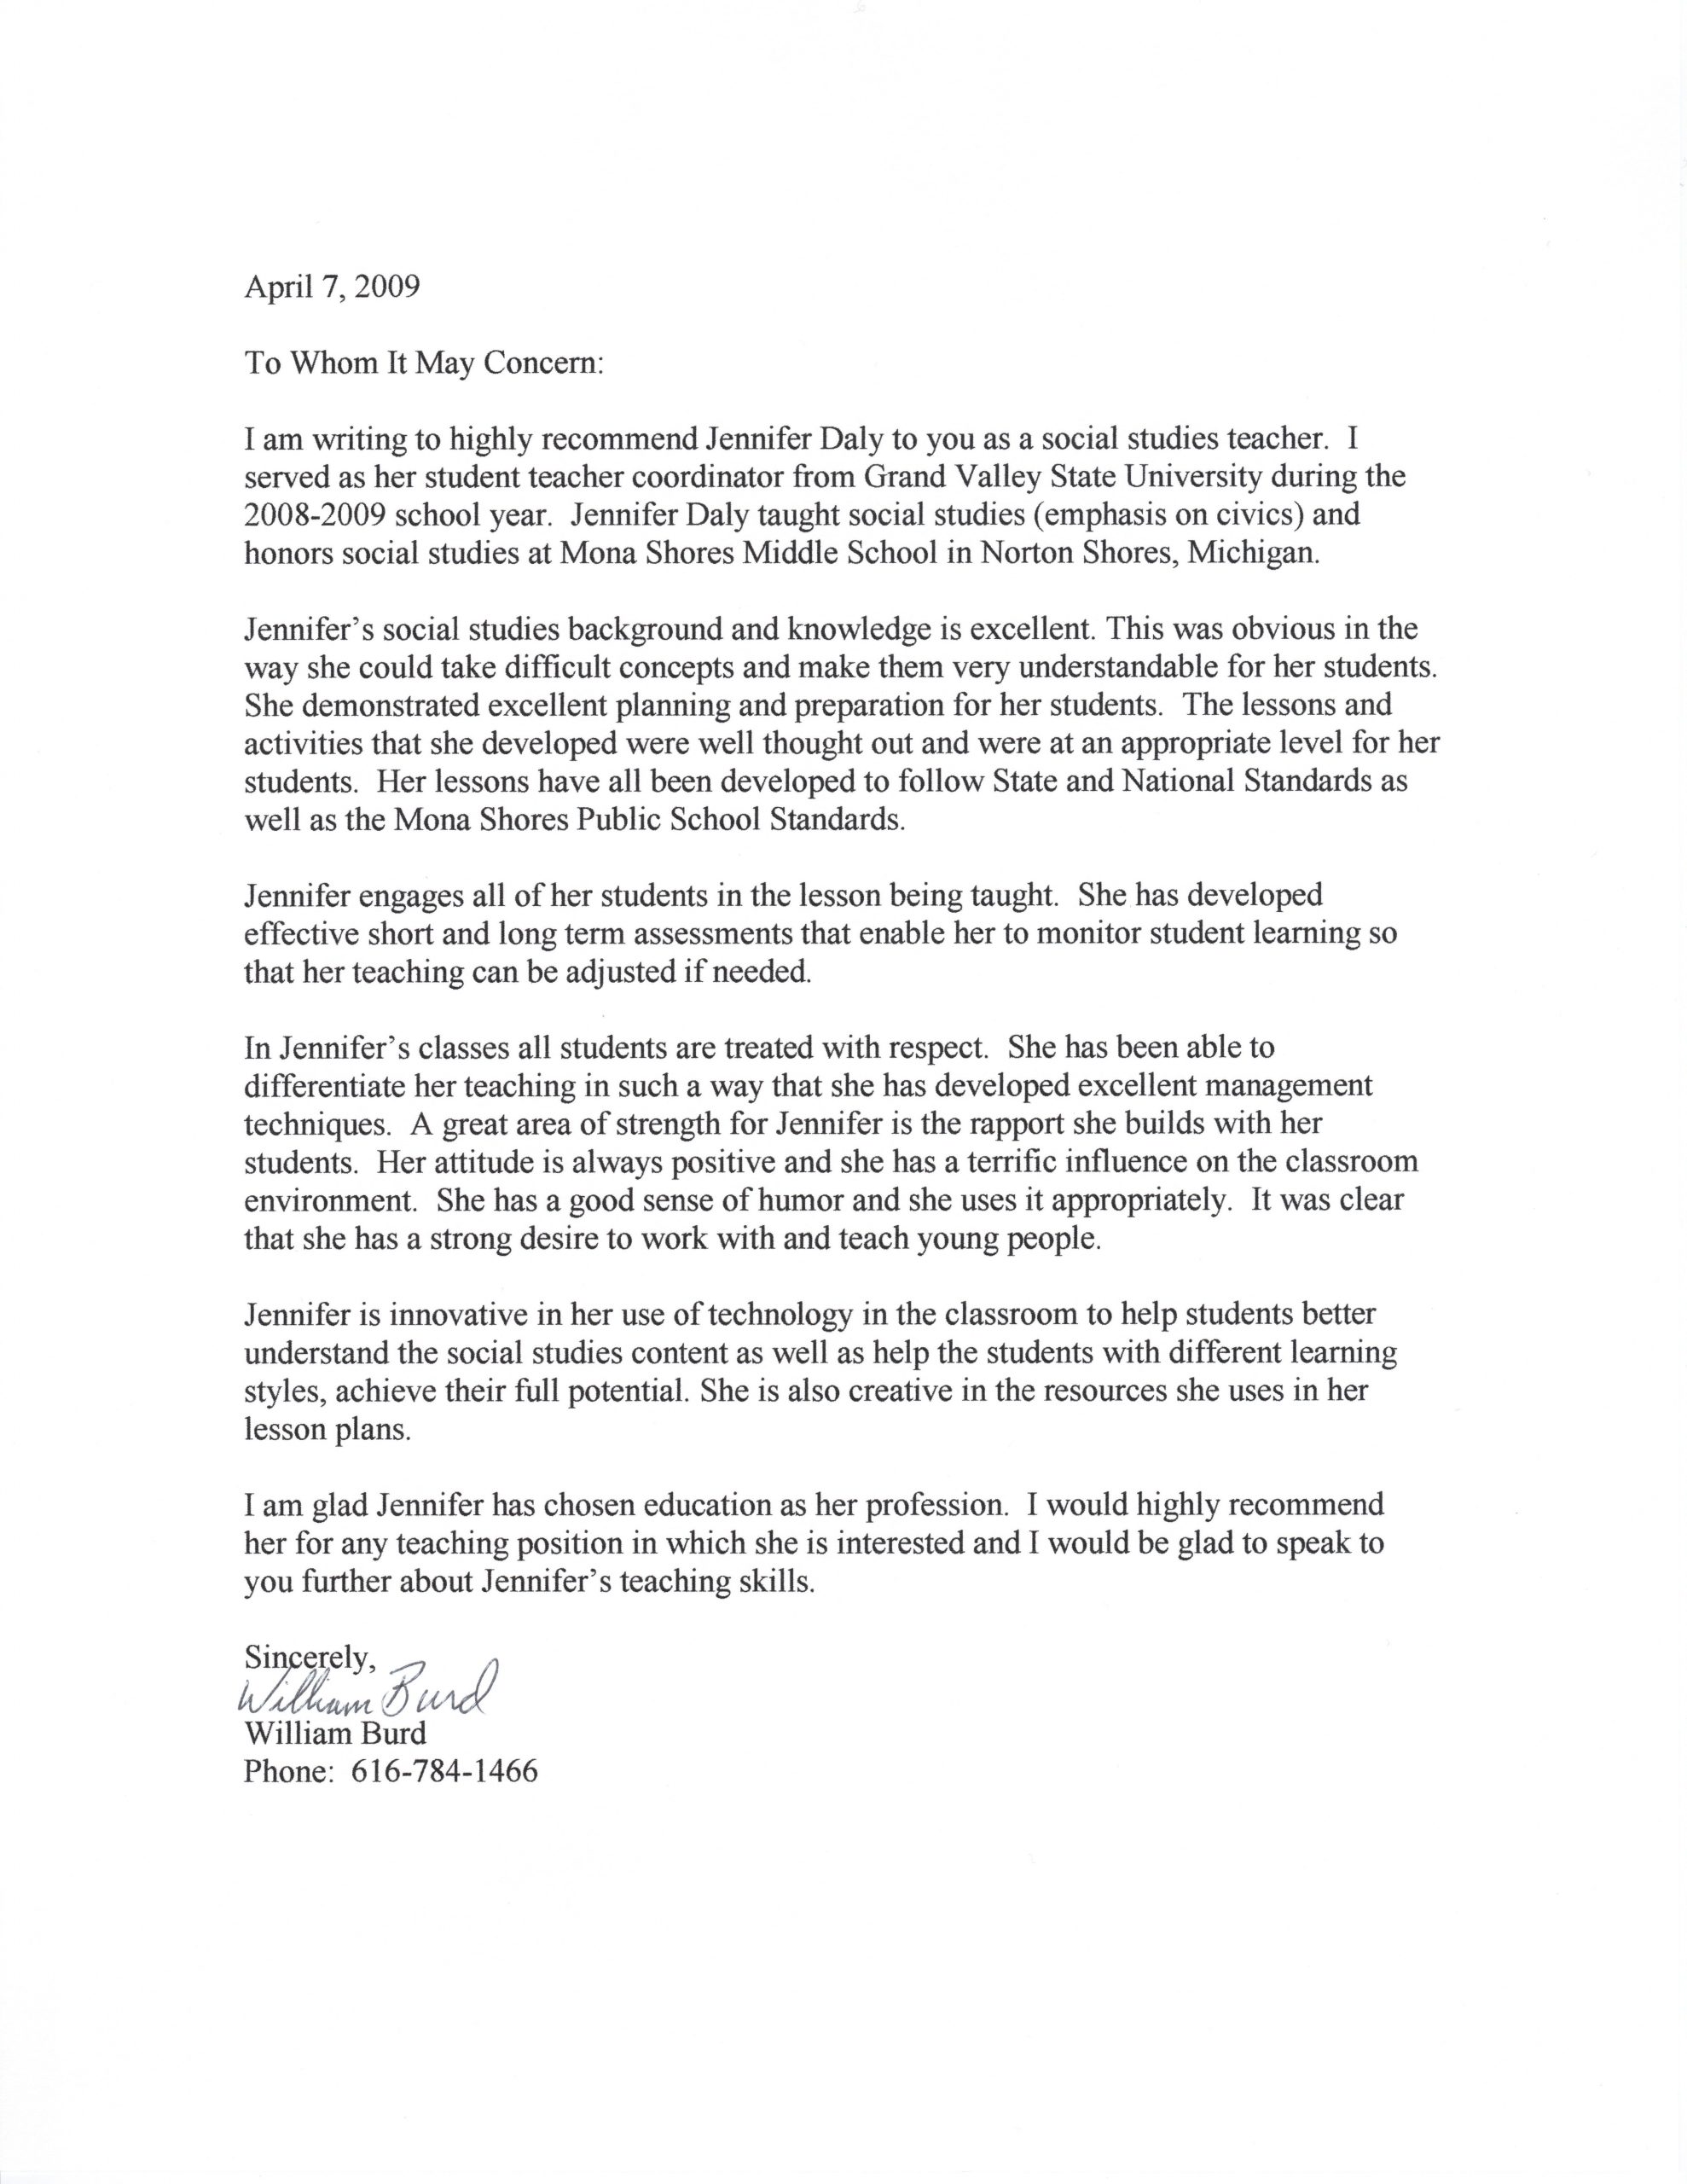 Student Teacher Letter Of Recommendation Enom throughout proportions 5100 X 6600